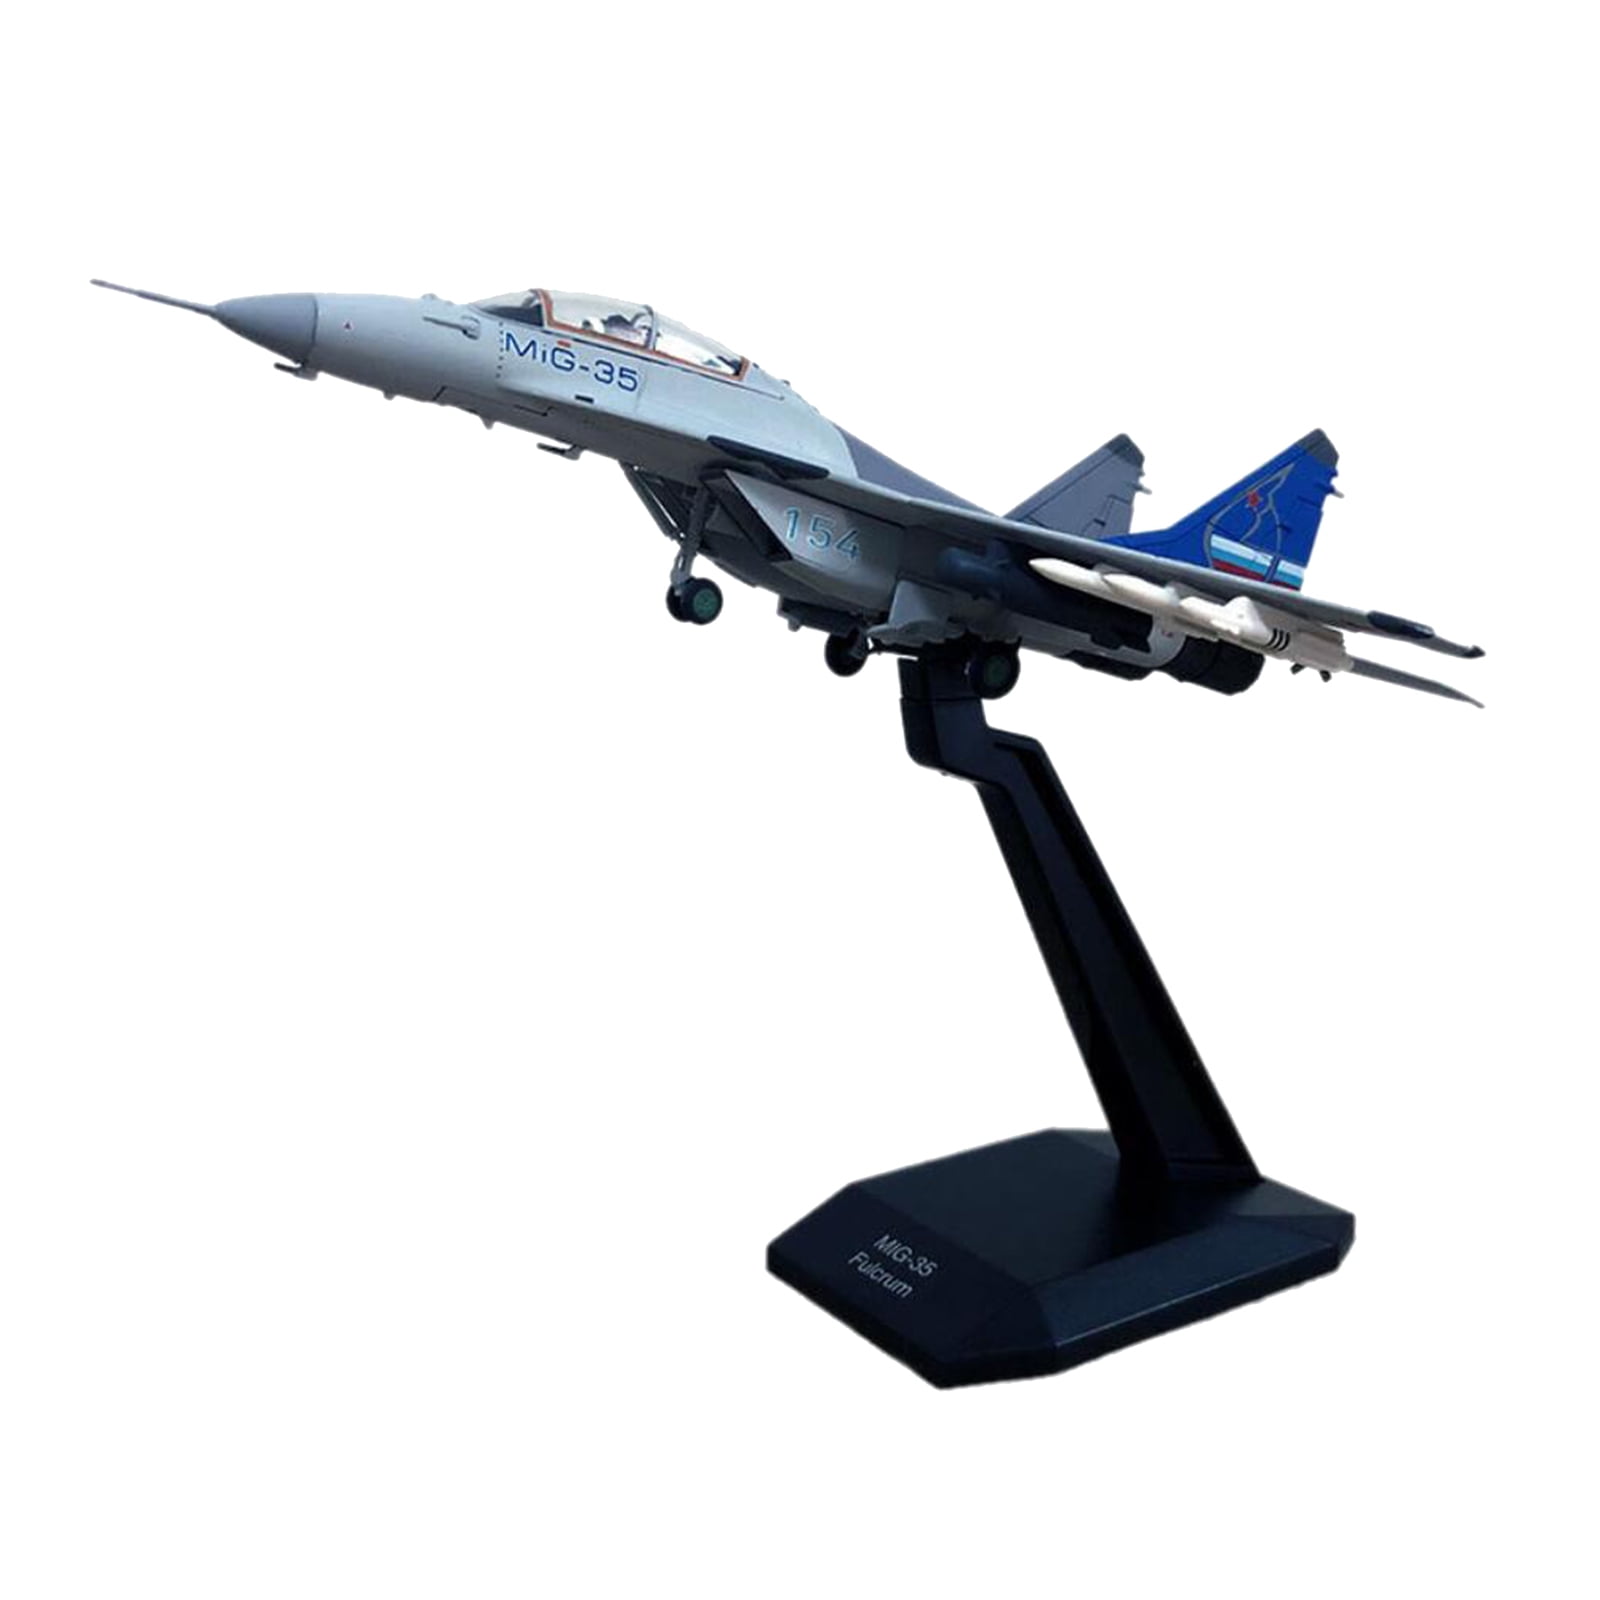 1:100 Diecast Military Model MIG 35 Jet Fighter Aircraft Replica Collection